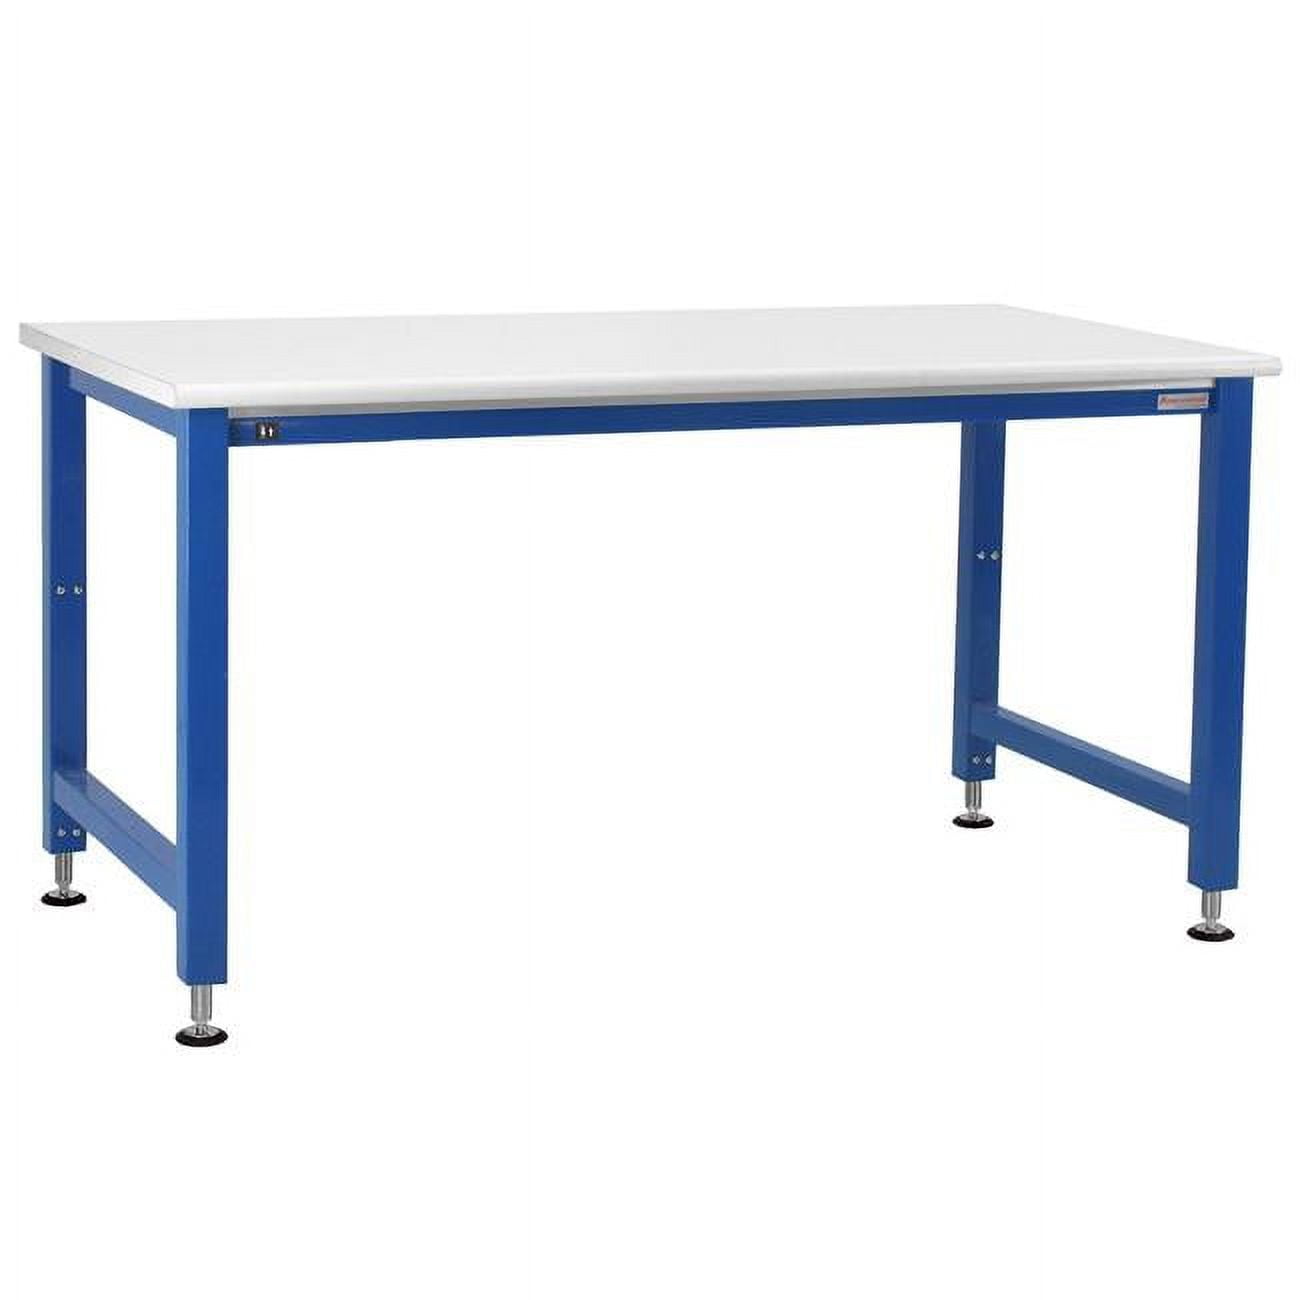 30 x 72 x 30-42 in. Adams Electric Lift Workbenches with Formica Laminate & Round Front Edge Top, Light Blue & White -  KD Gabinetes, KD2804520